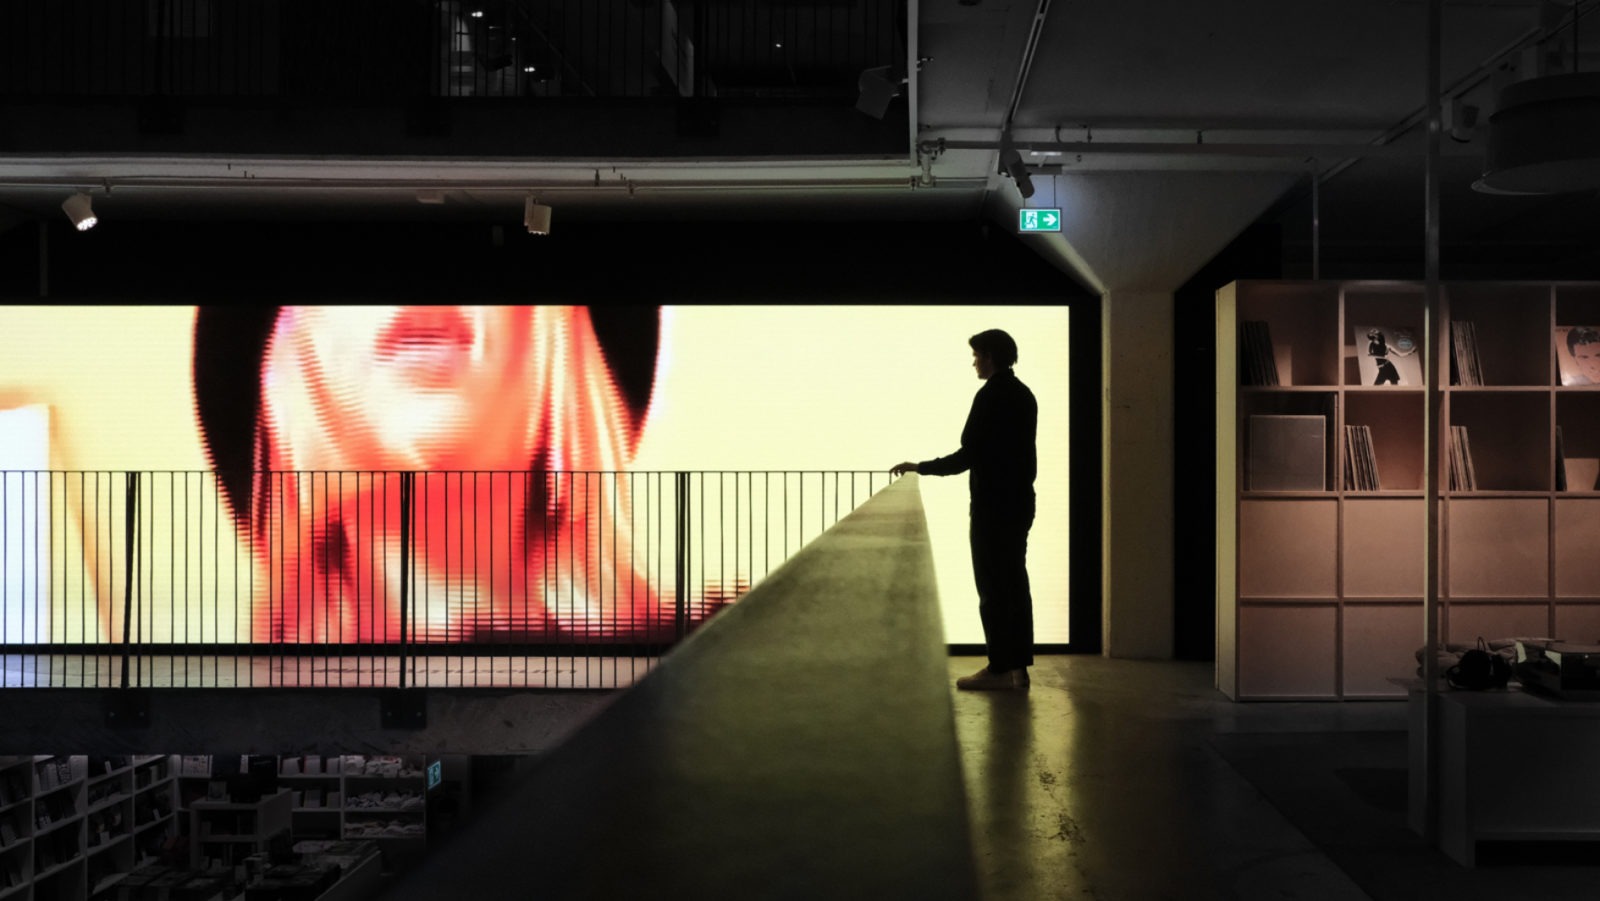 The silhouette of a person standing inside IKEA Museum, looking at a large screen showing a woman enjoying music.